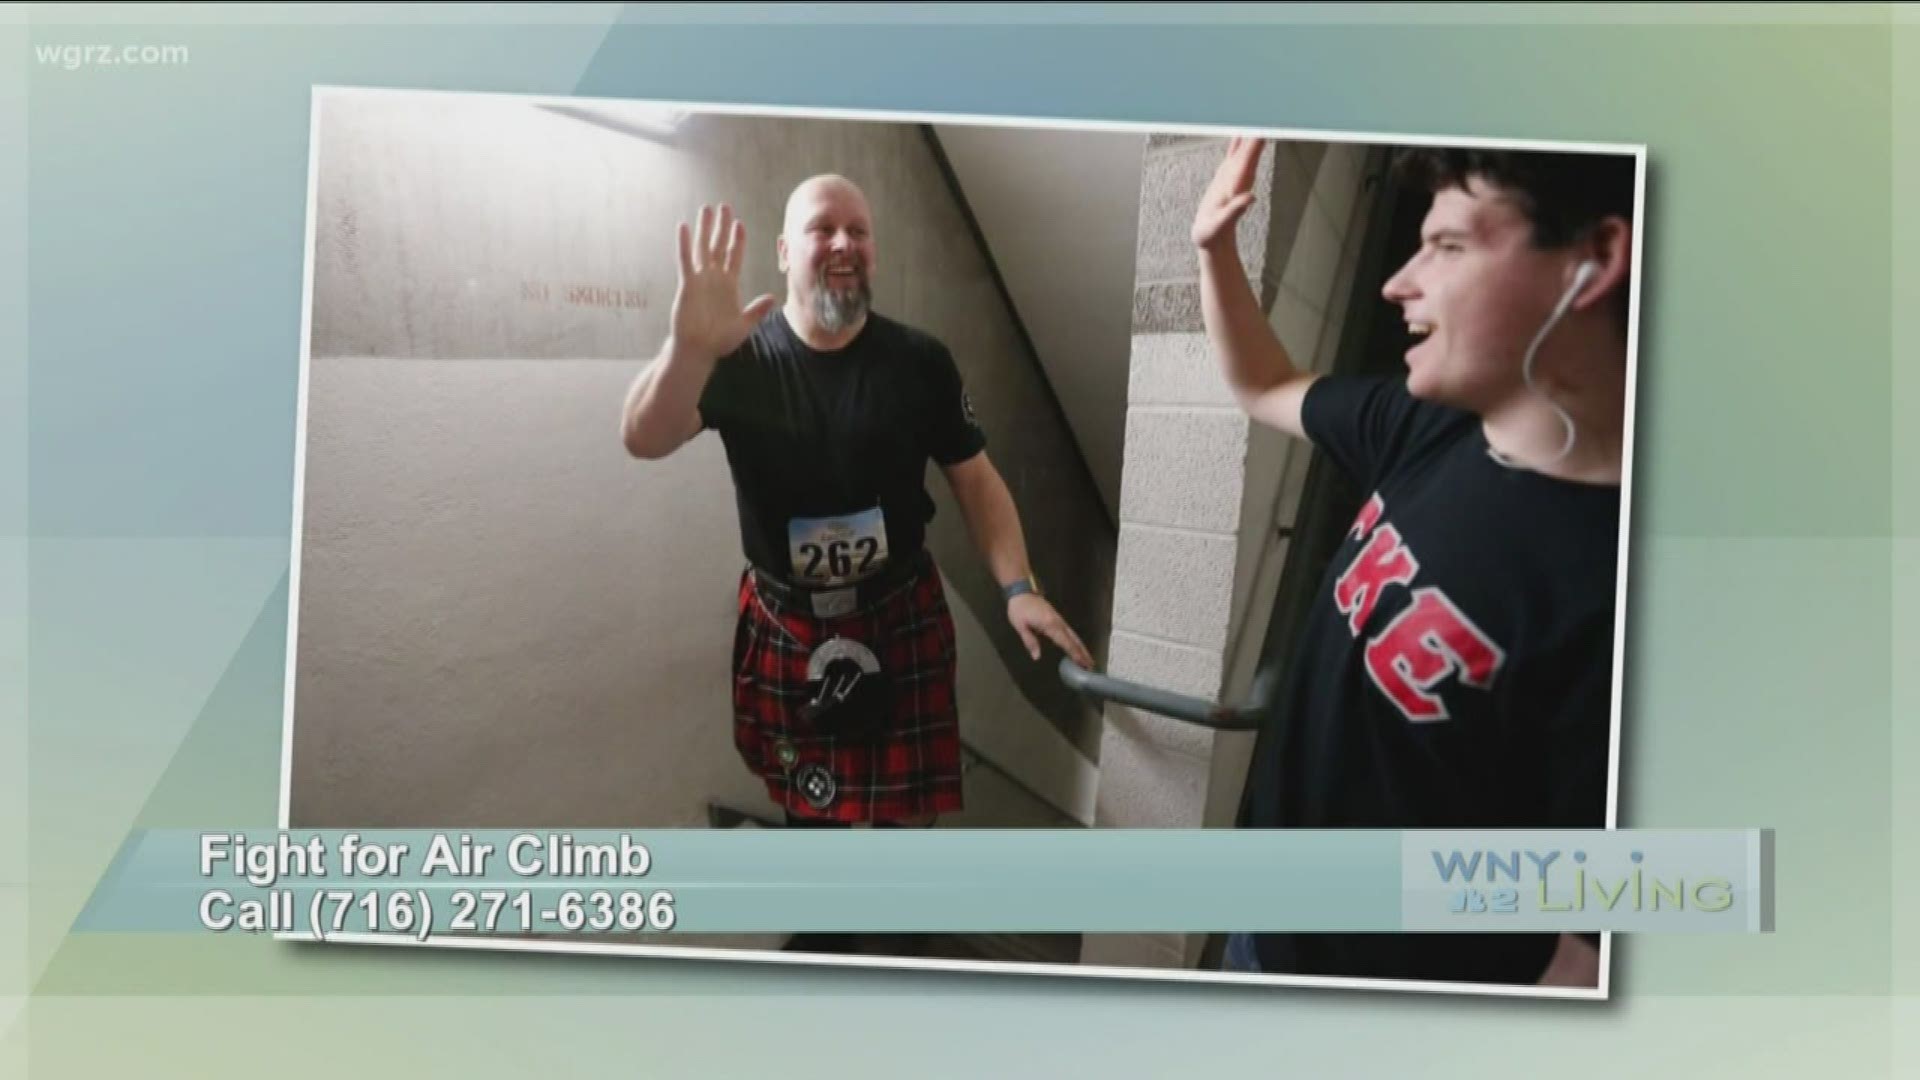 February 15 - Fight For Air Climb (THIS VIDEO IS SPONSORED BY FIGHT FOR AIR CLIMB)